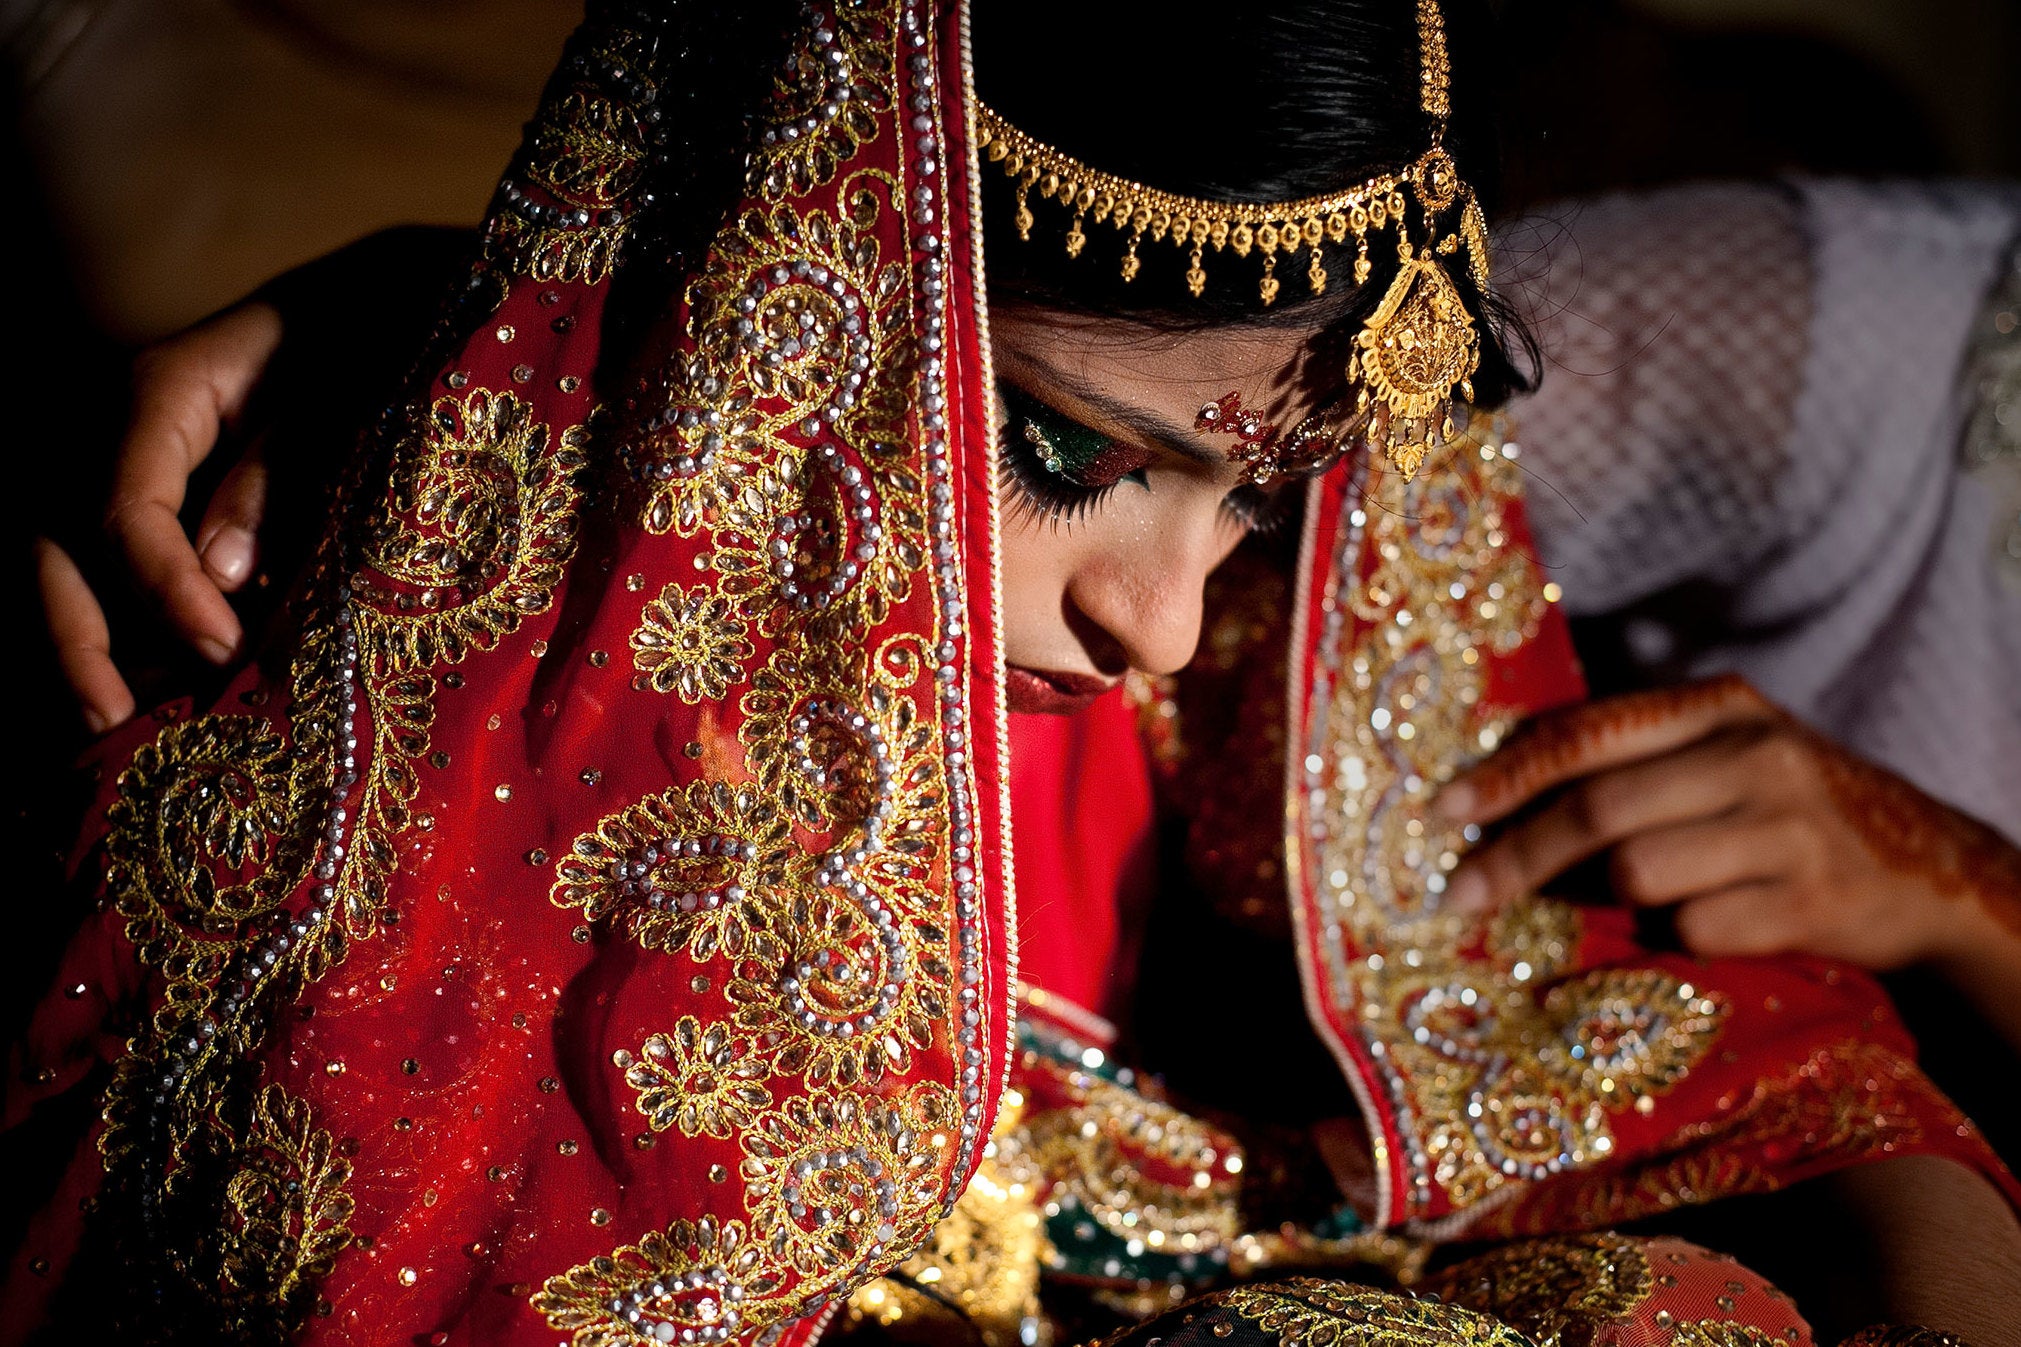 Bangladesh child marriage New law will reduce minimum marital age to zero The Independent The Independent